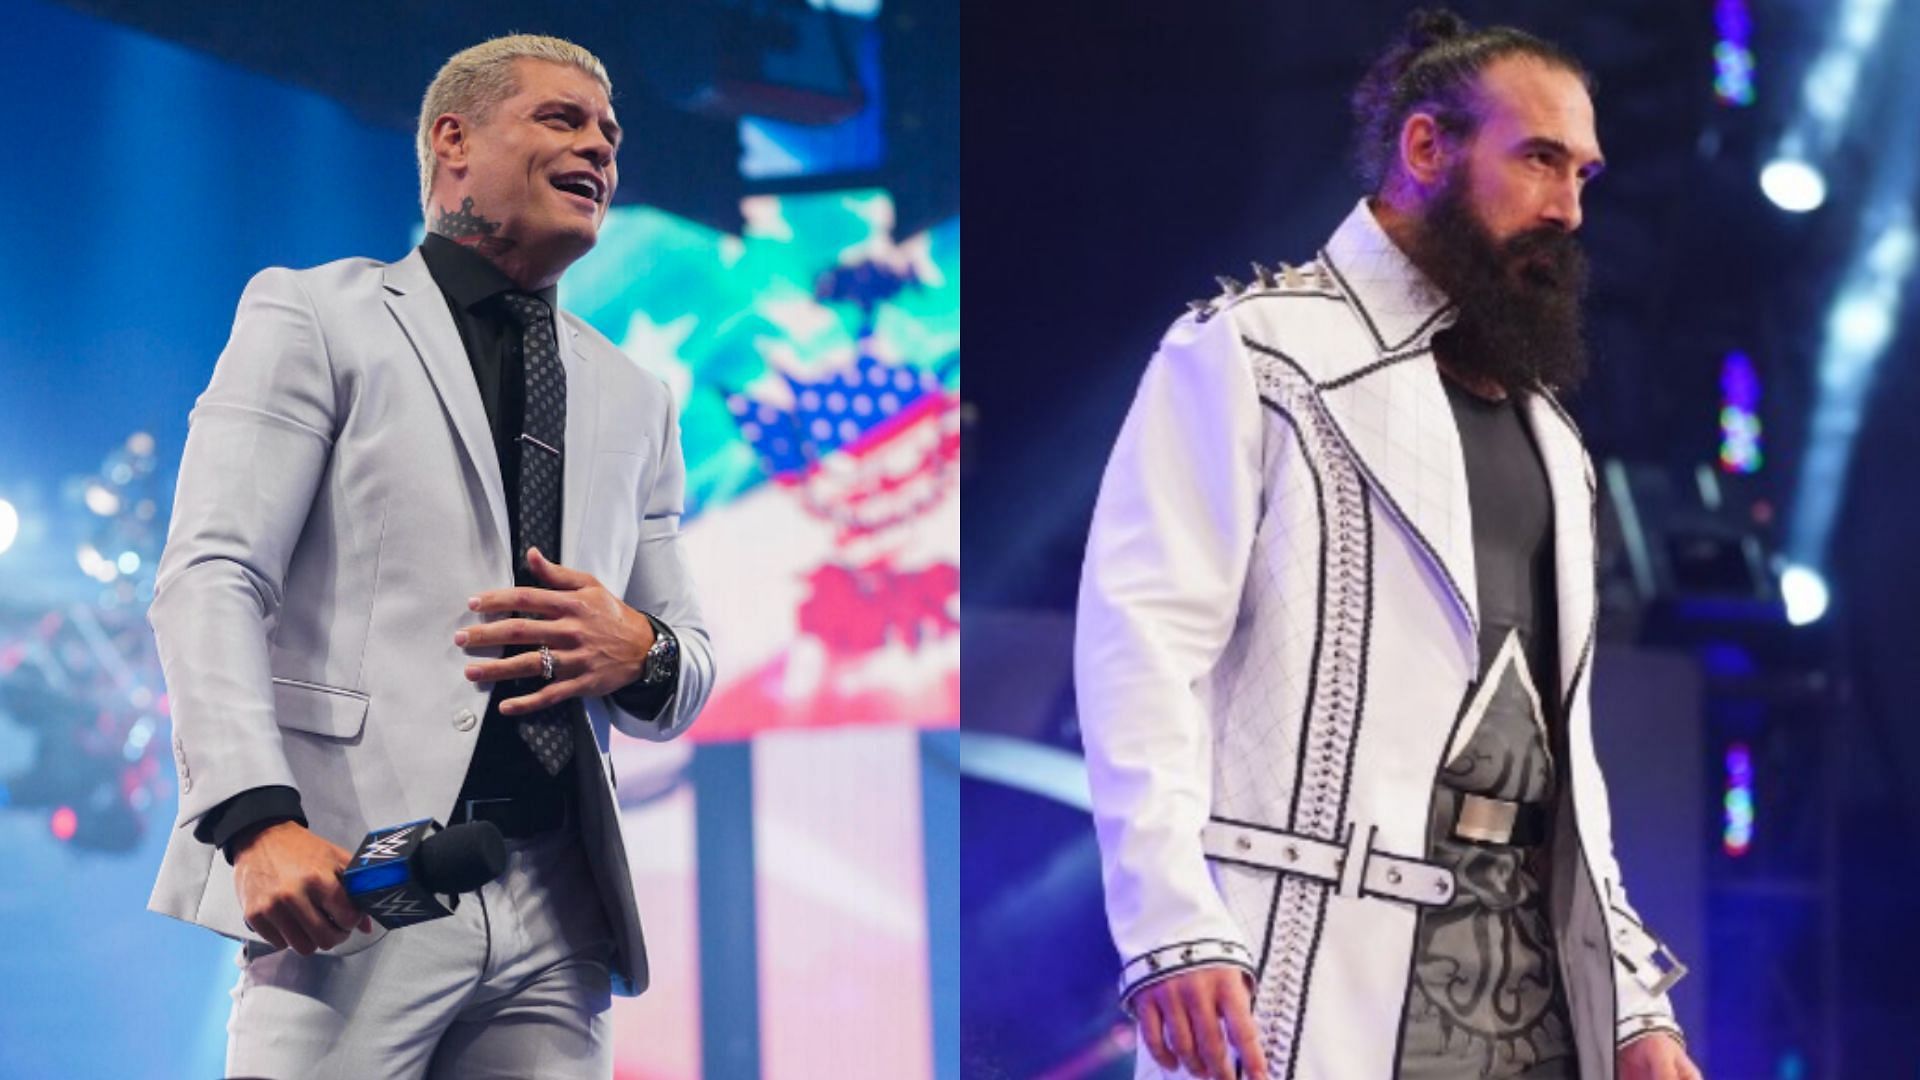 Cody Rhodes and Brodie Lee were colleagues in AEW [Image Credits: WWE